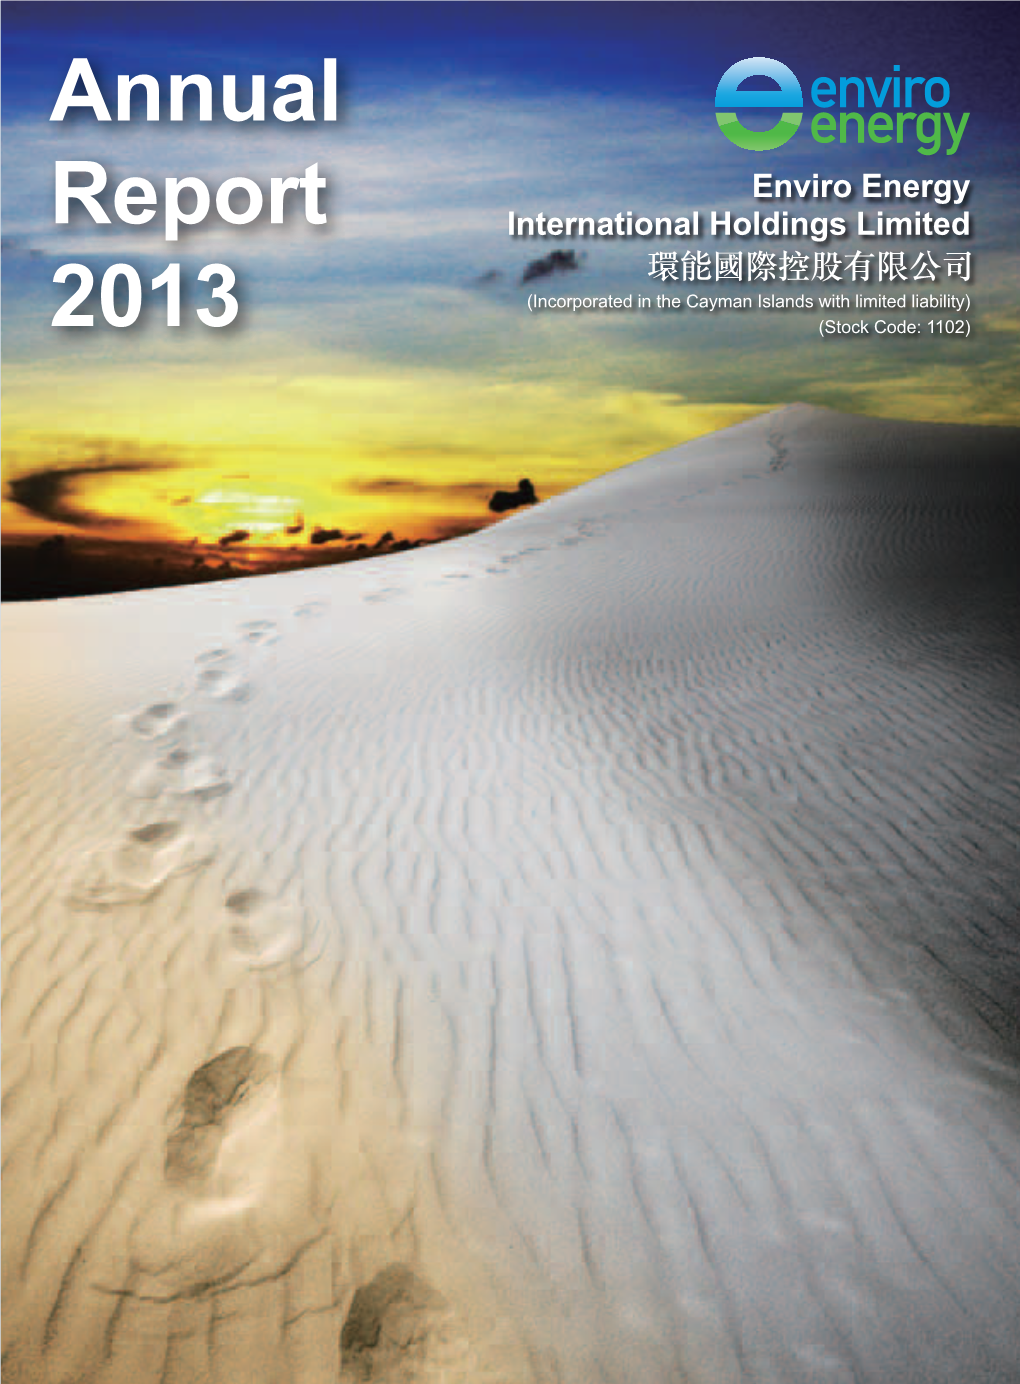 ENVIRO ENERGY INTERNATIONAL HOLDINGS LIMITED ANNUAL REPORT 2013 Corporate Information